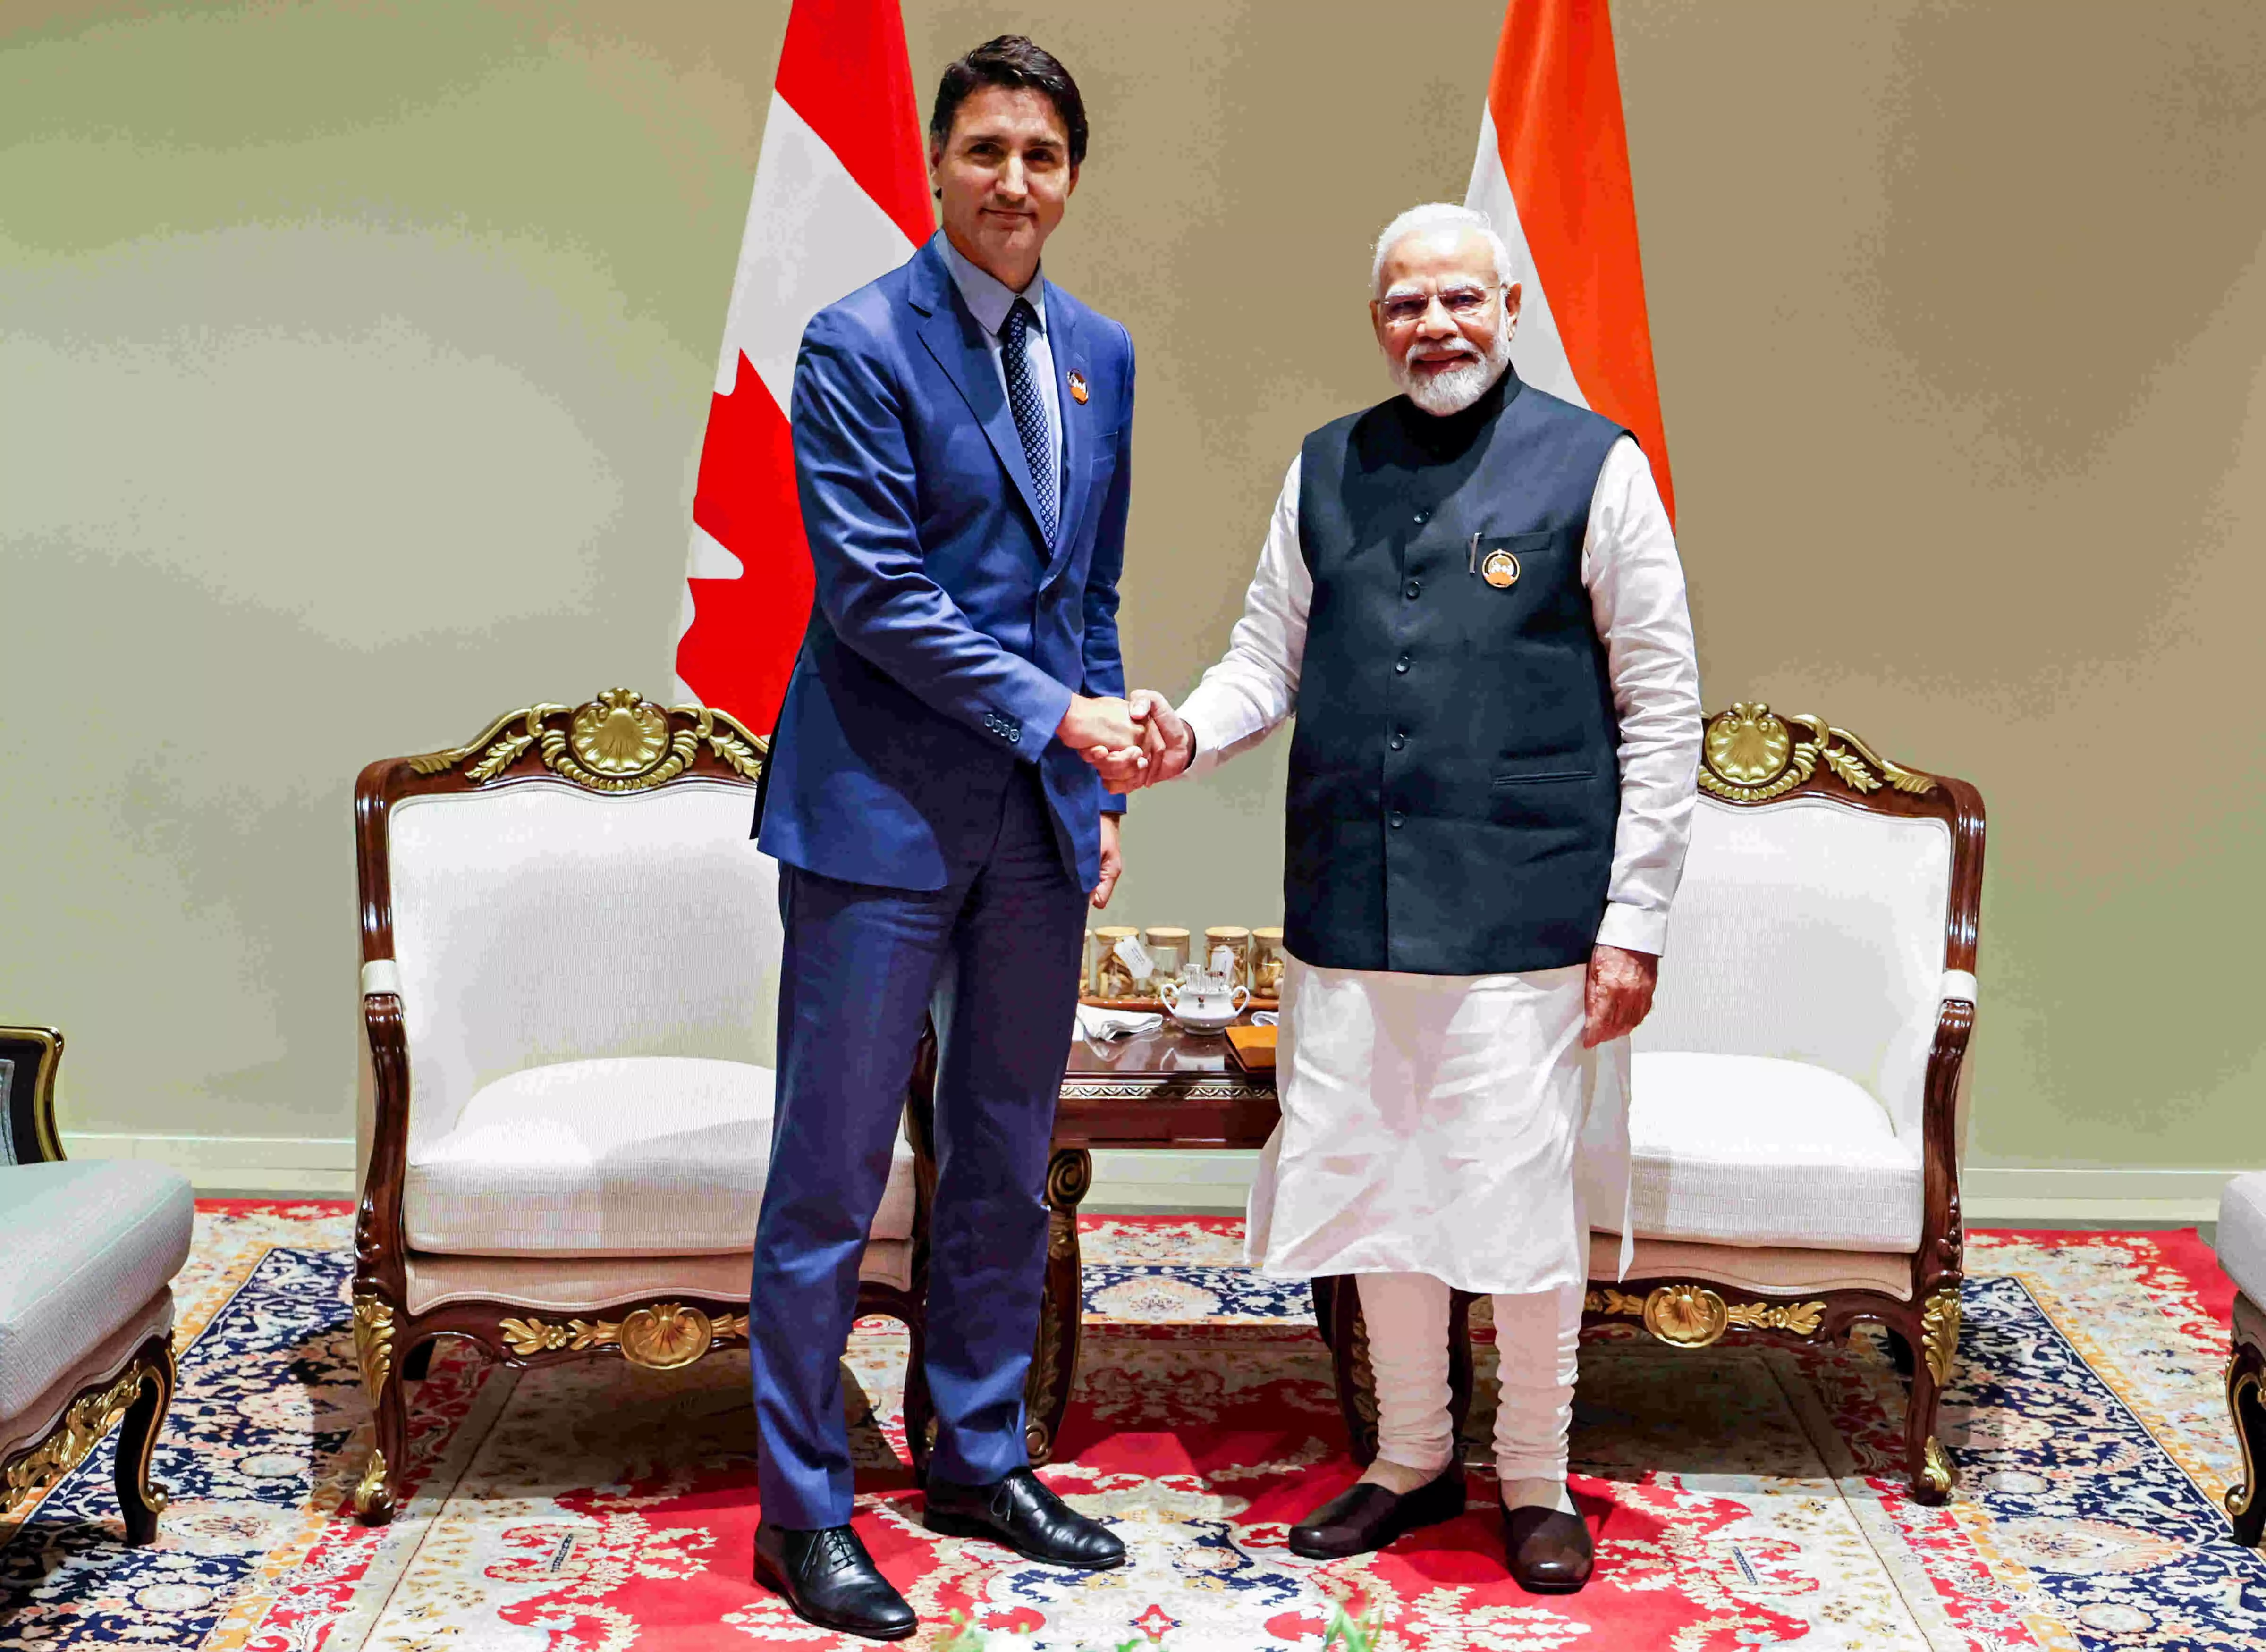 Canadas Defence minister terms relationship with India as important